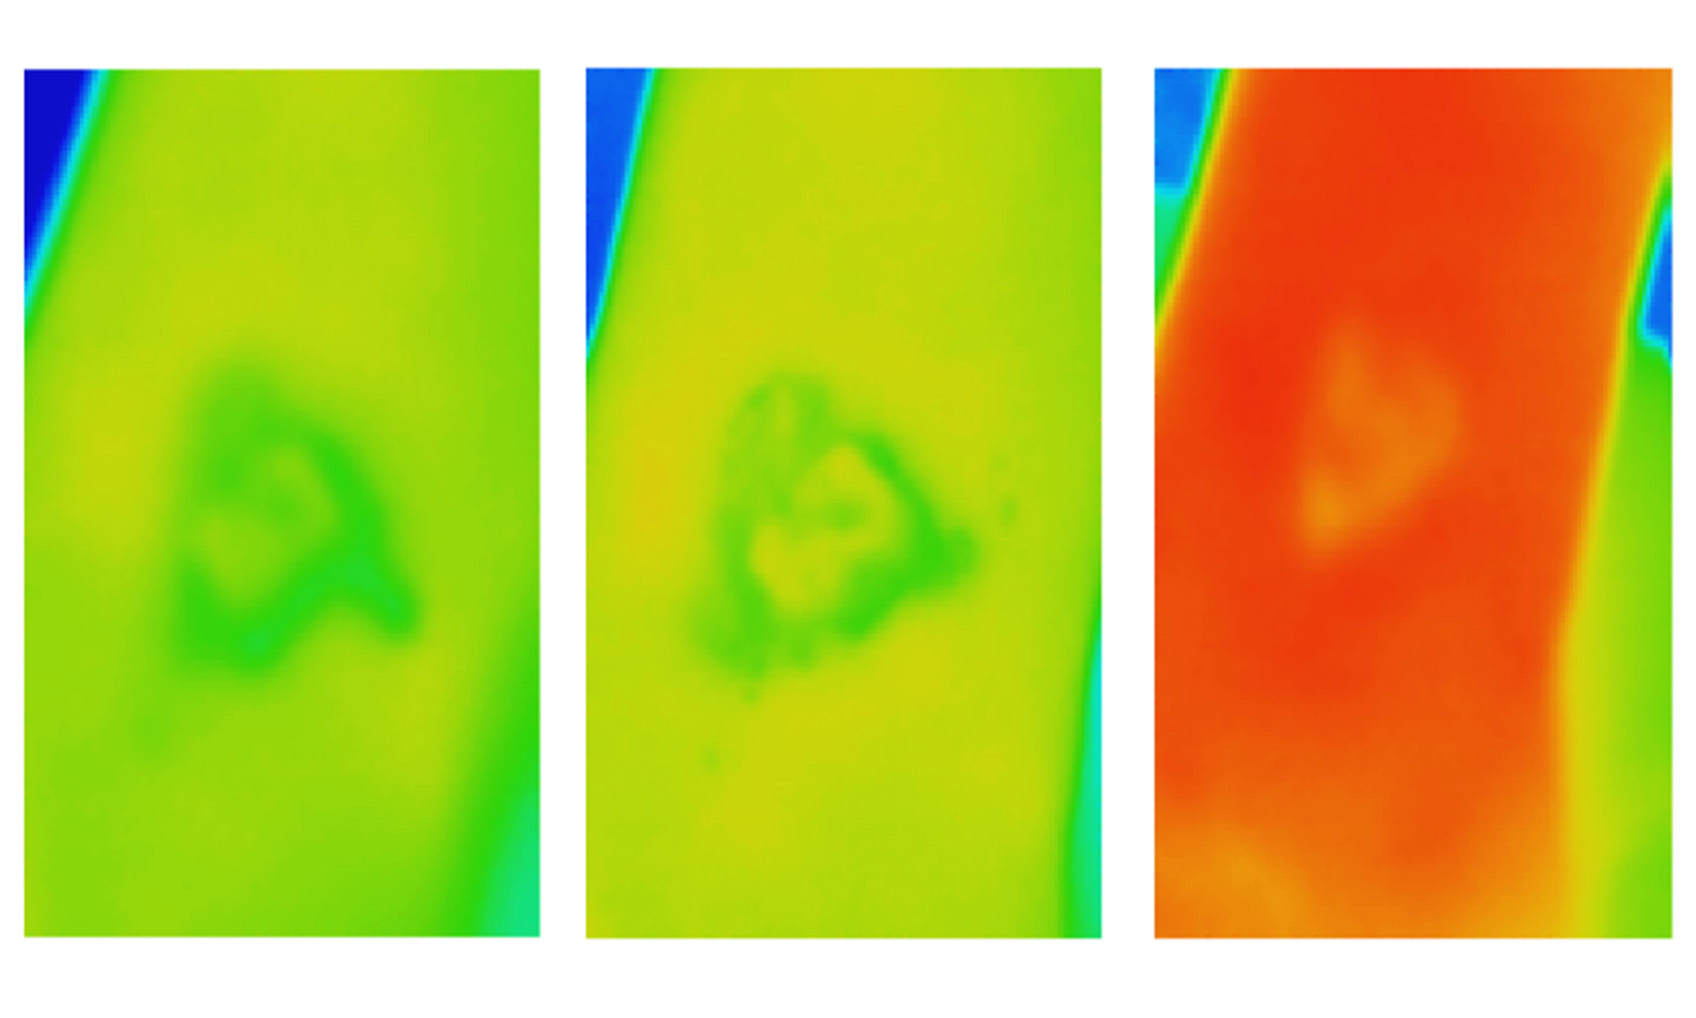 Thermal images of a venous leg ulcer that ultimately failed to heal. The images, taken over three weeks early in the healing process, can be used to predict that a VLU will not heal normally at week 12 and needs extra care.